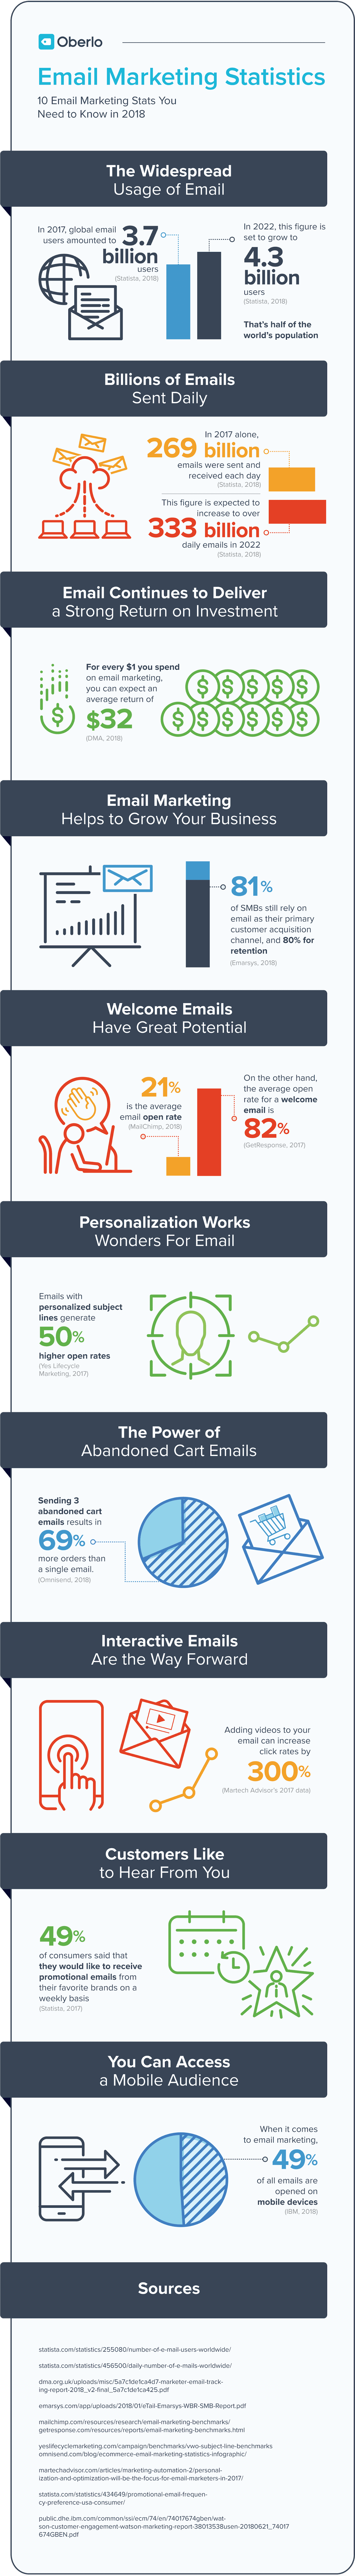 10 Email Marketing Stats You Need to Know [Infographic], email address free of charge, find someone's email address, guess email address, email finder, email address search, email hunter